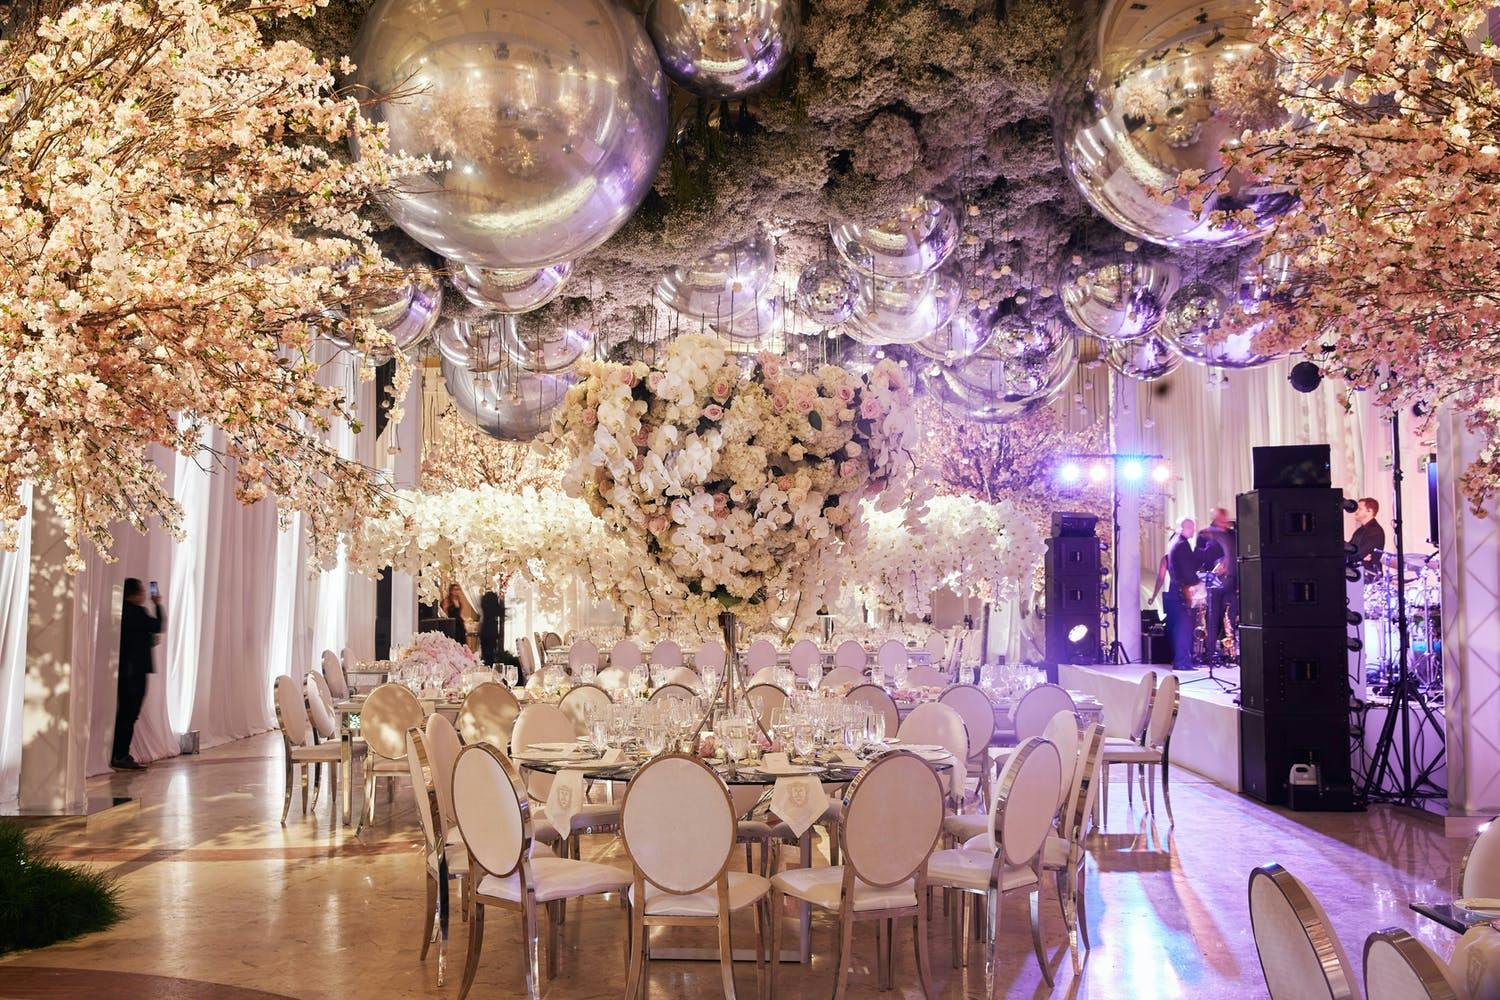 Luxuriant Wedding With Opulent Wedding Ceiling Decorations Consisting of Silver Balloons and White Florals | PartySlate